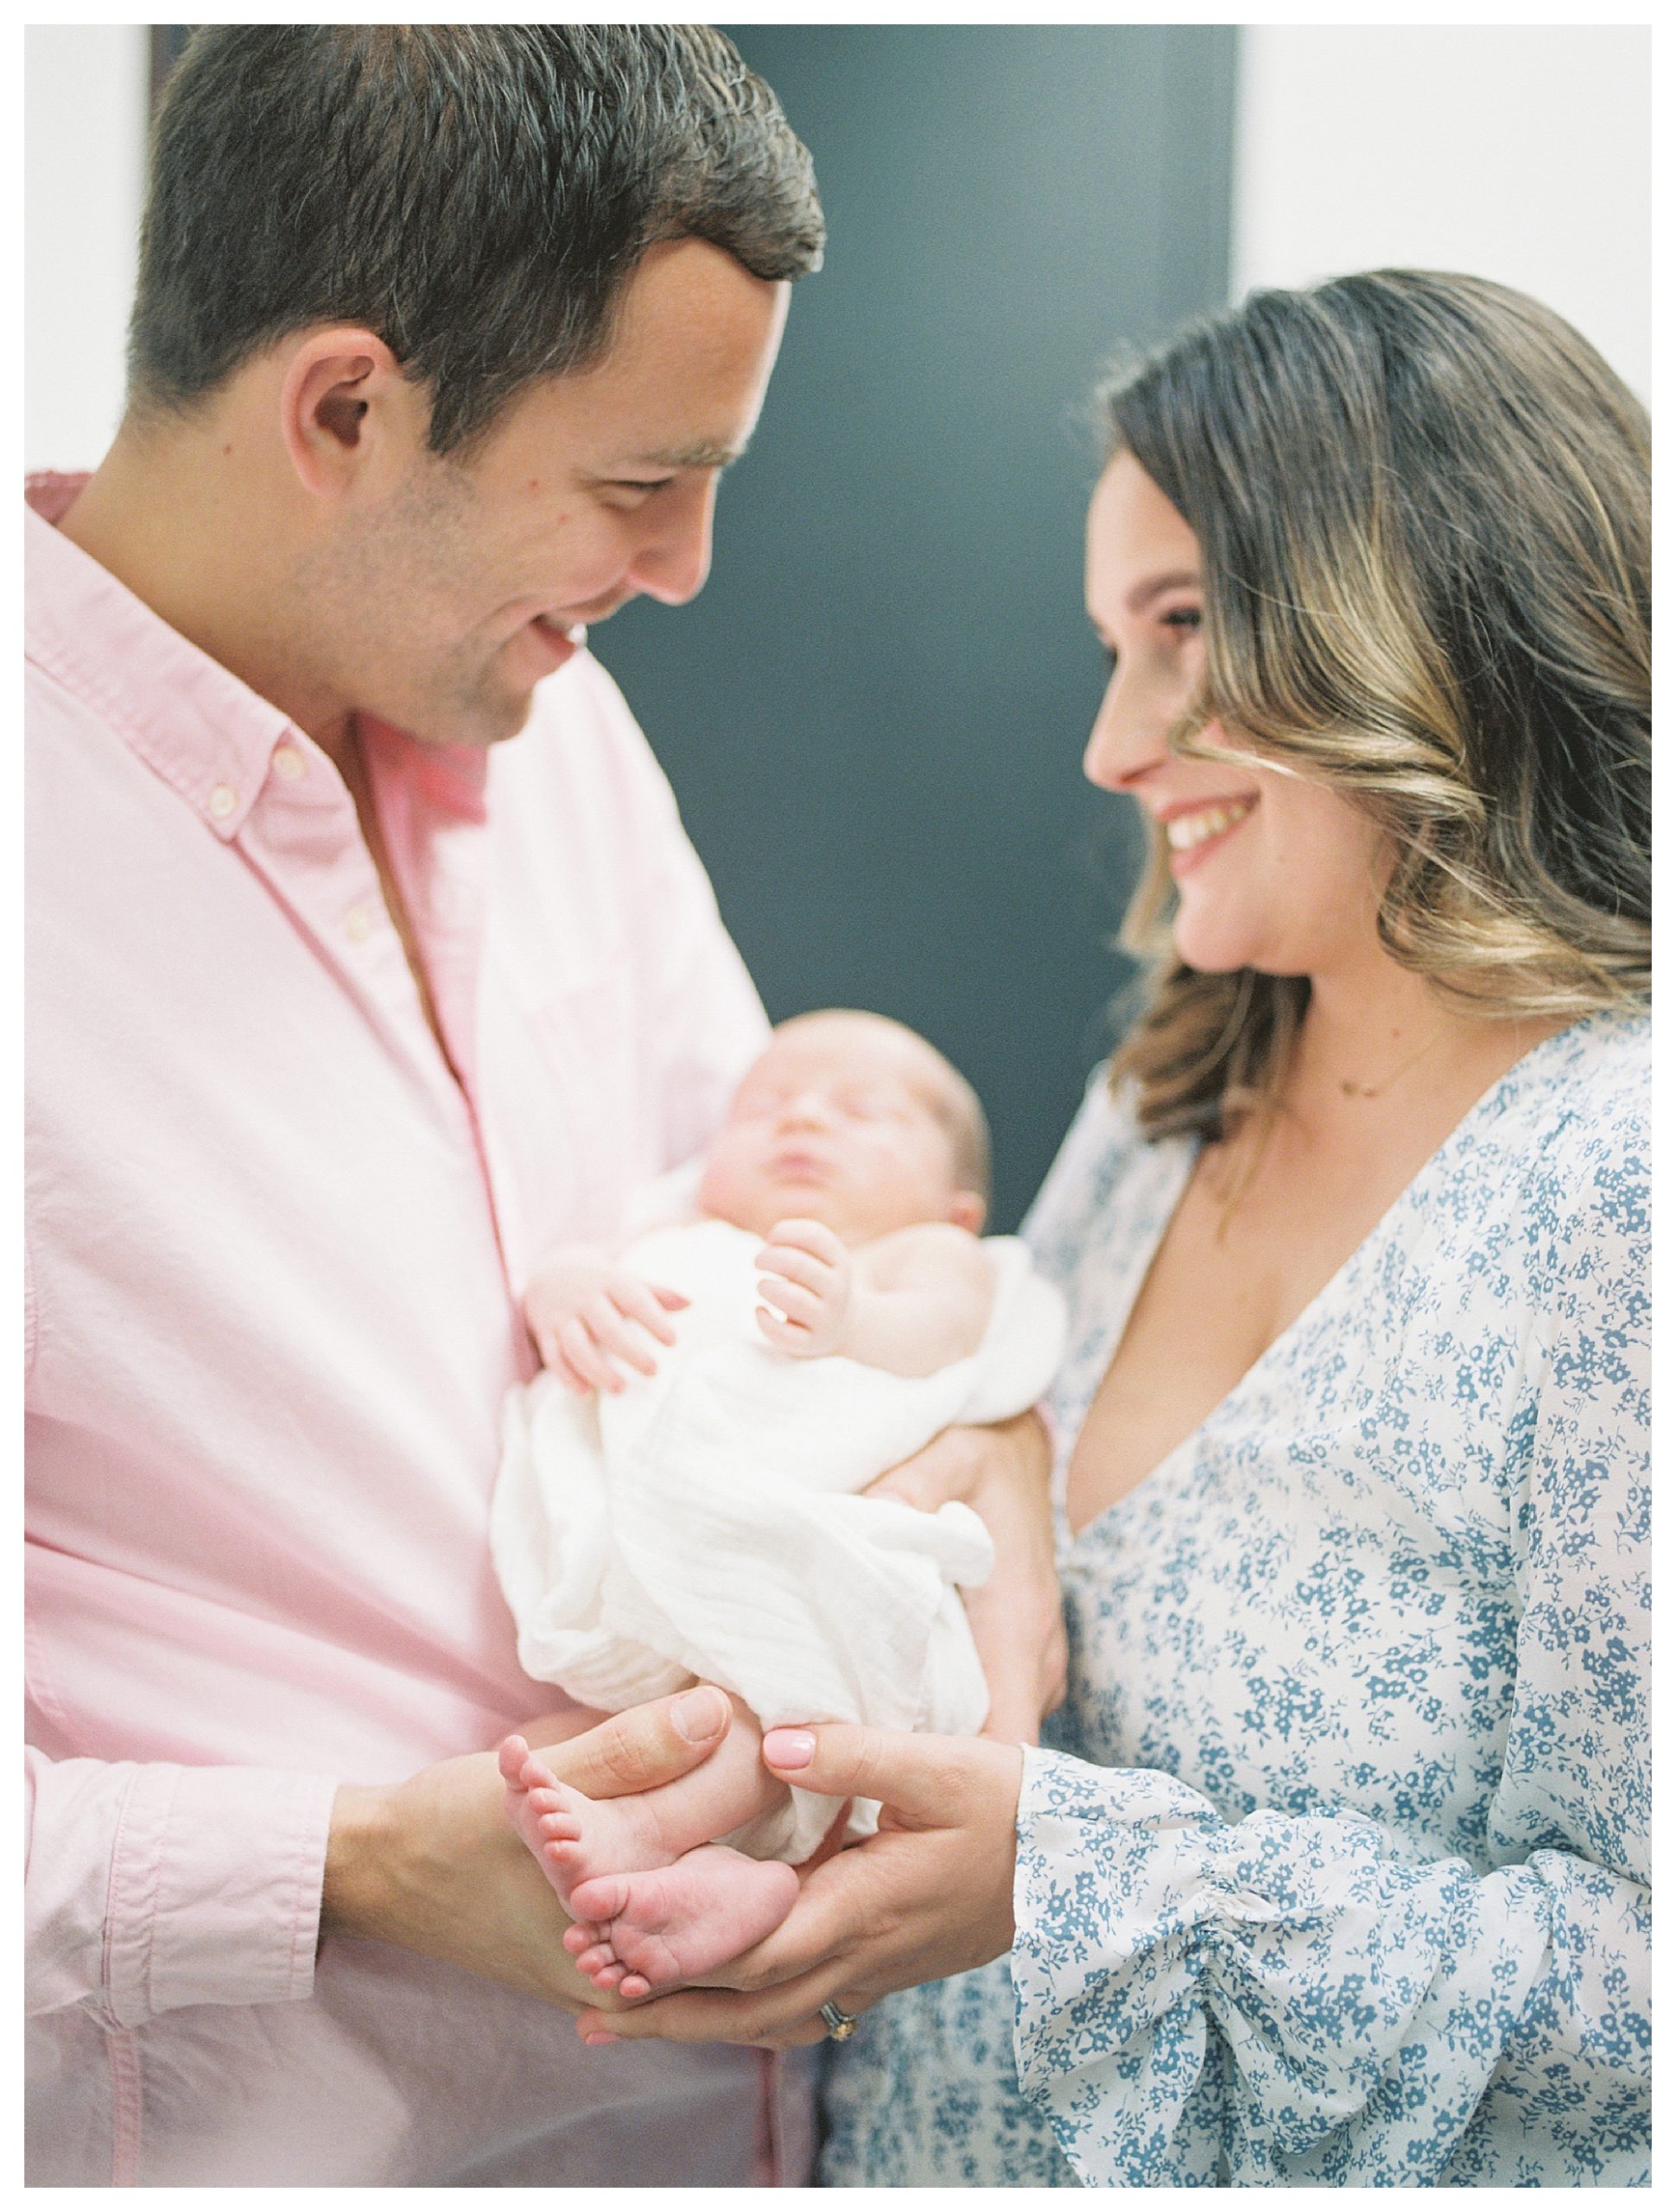 New parents hold their newborn baby and smile at one another during their in-home newborn session.